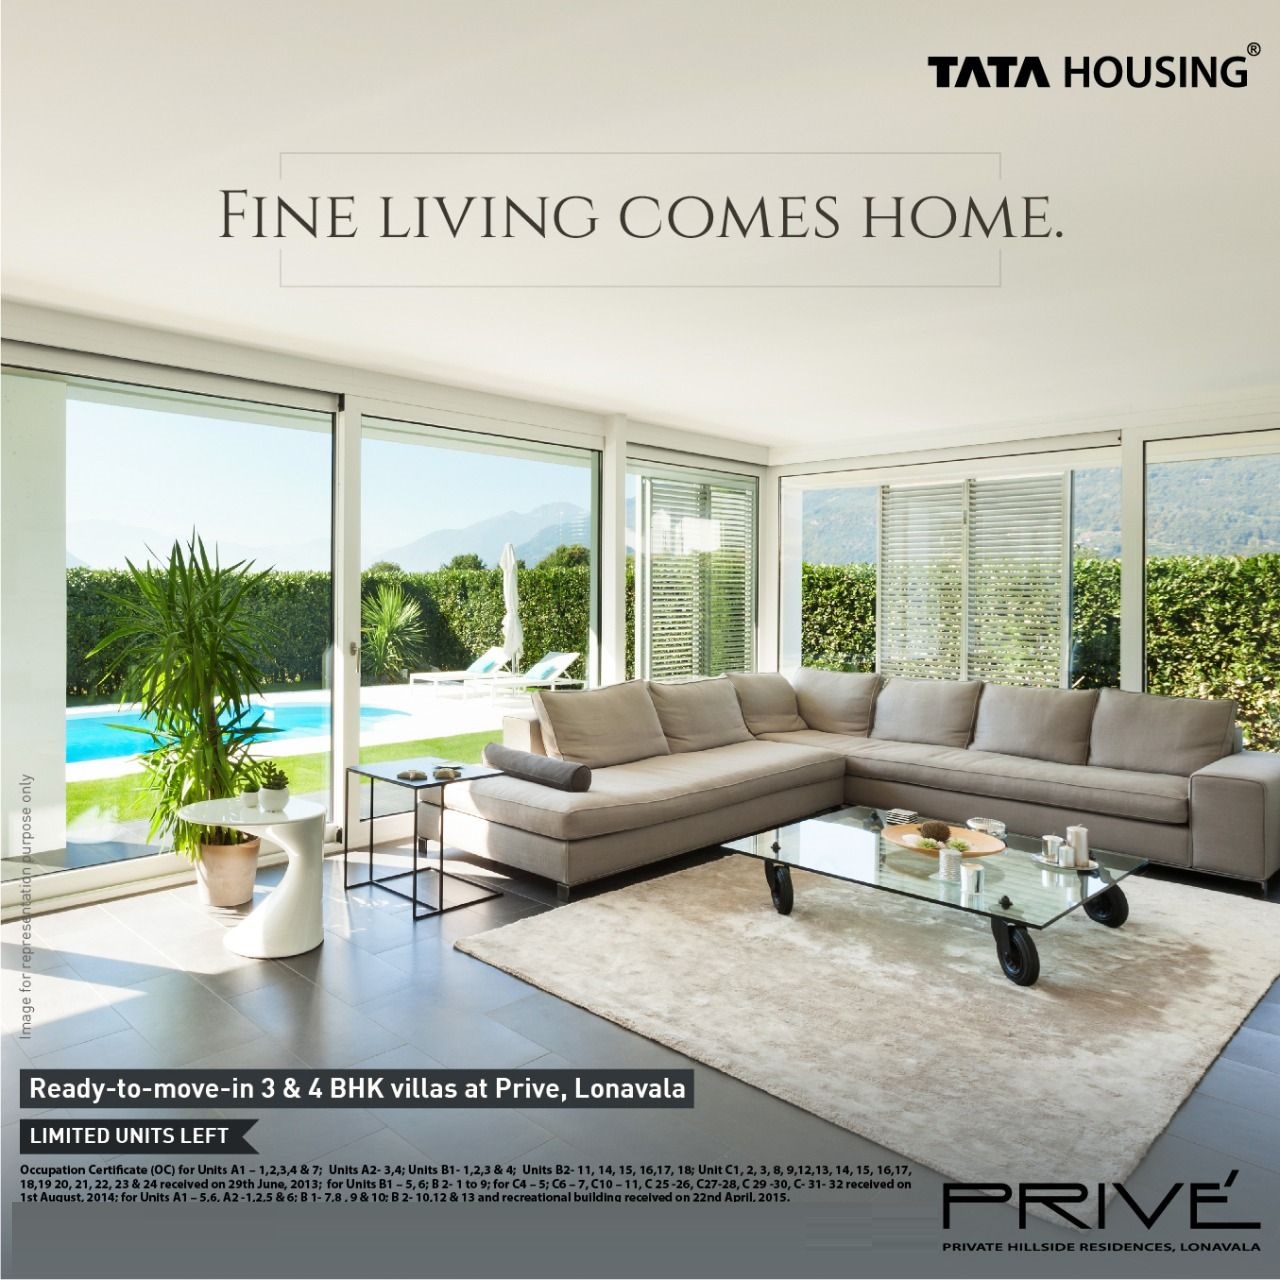 Ready-to-move-in 3 and 4 BHK villas at Tata Prive, Lonavala in Pune Update